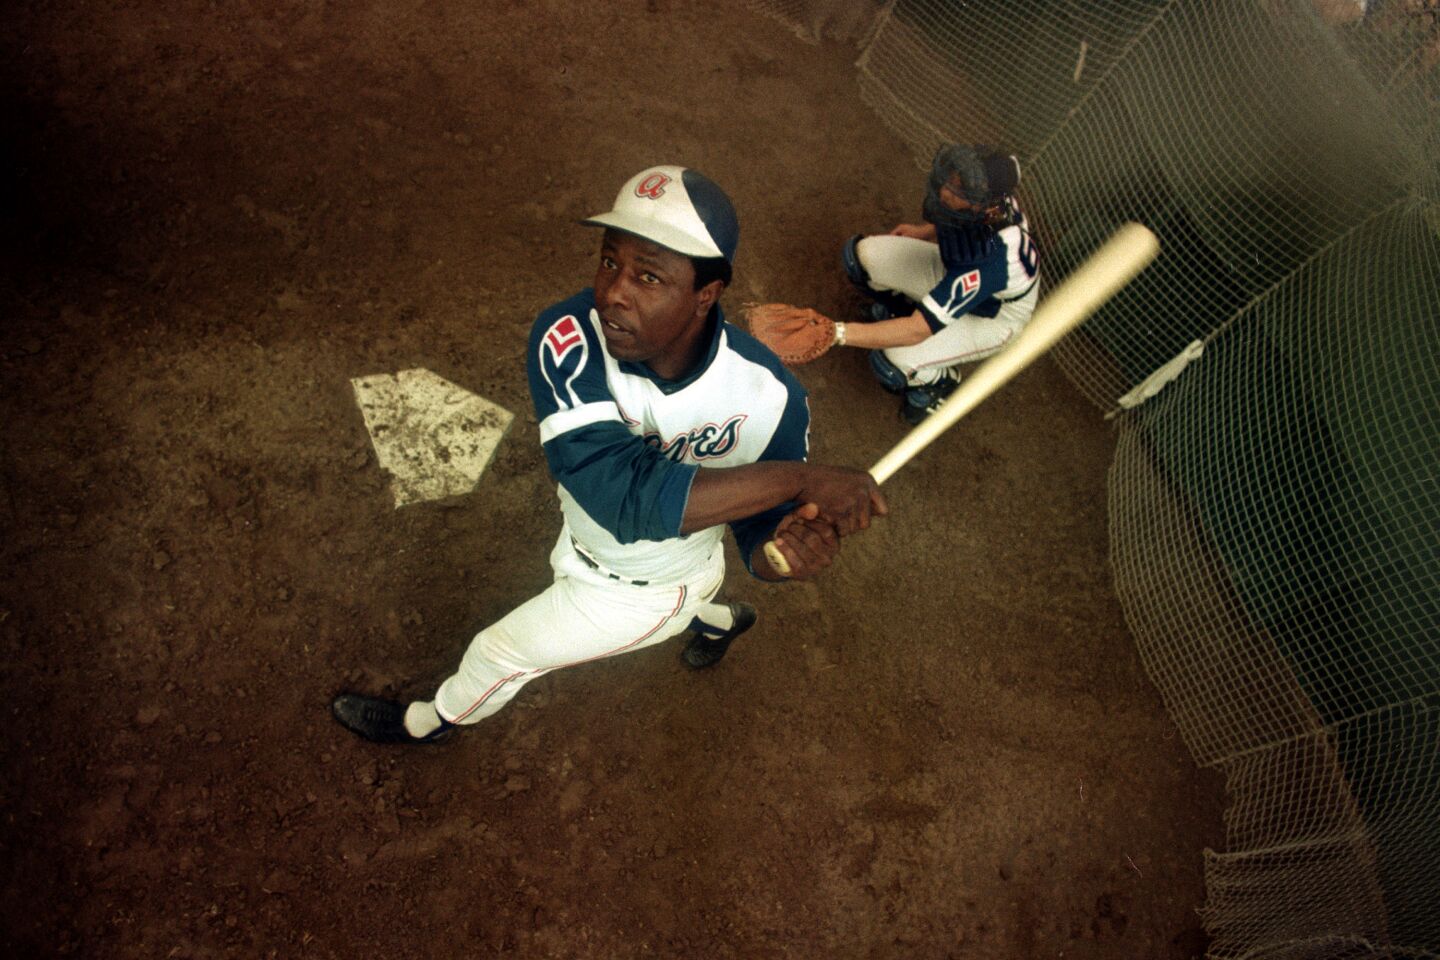 Atlanta Braves outfielder Hank Aaron swings a bat at home plate during spring training